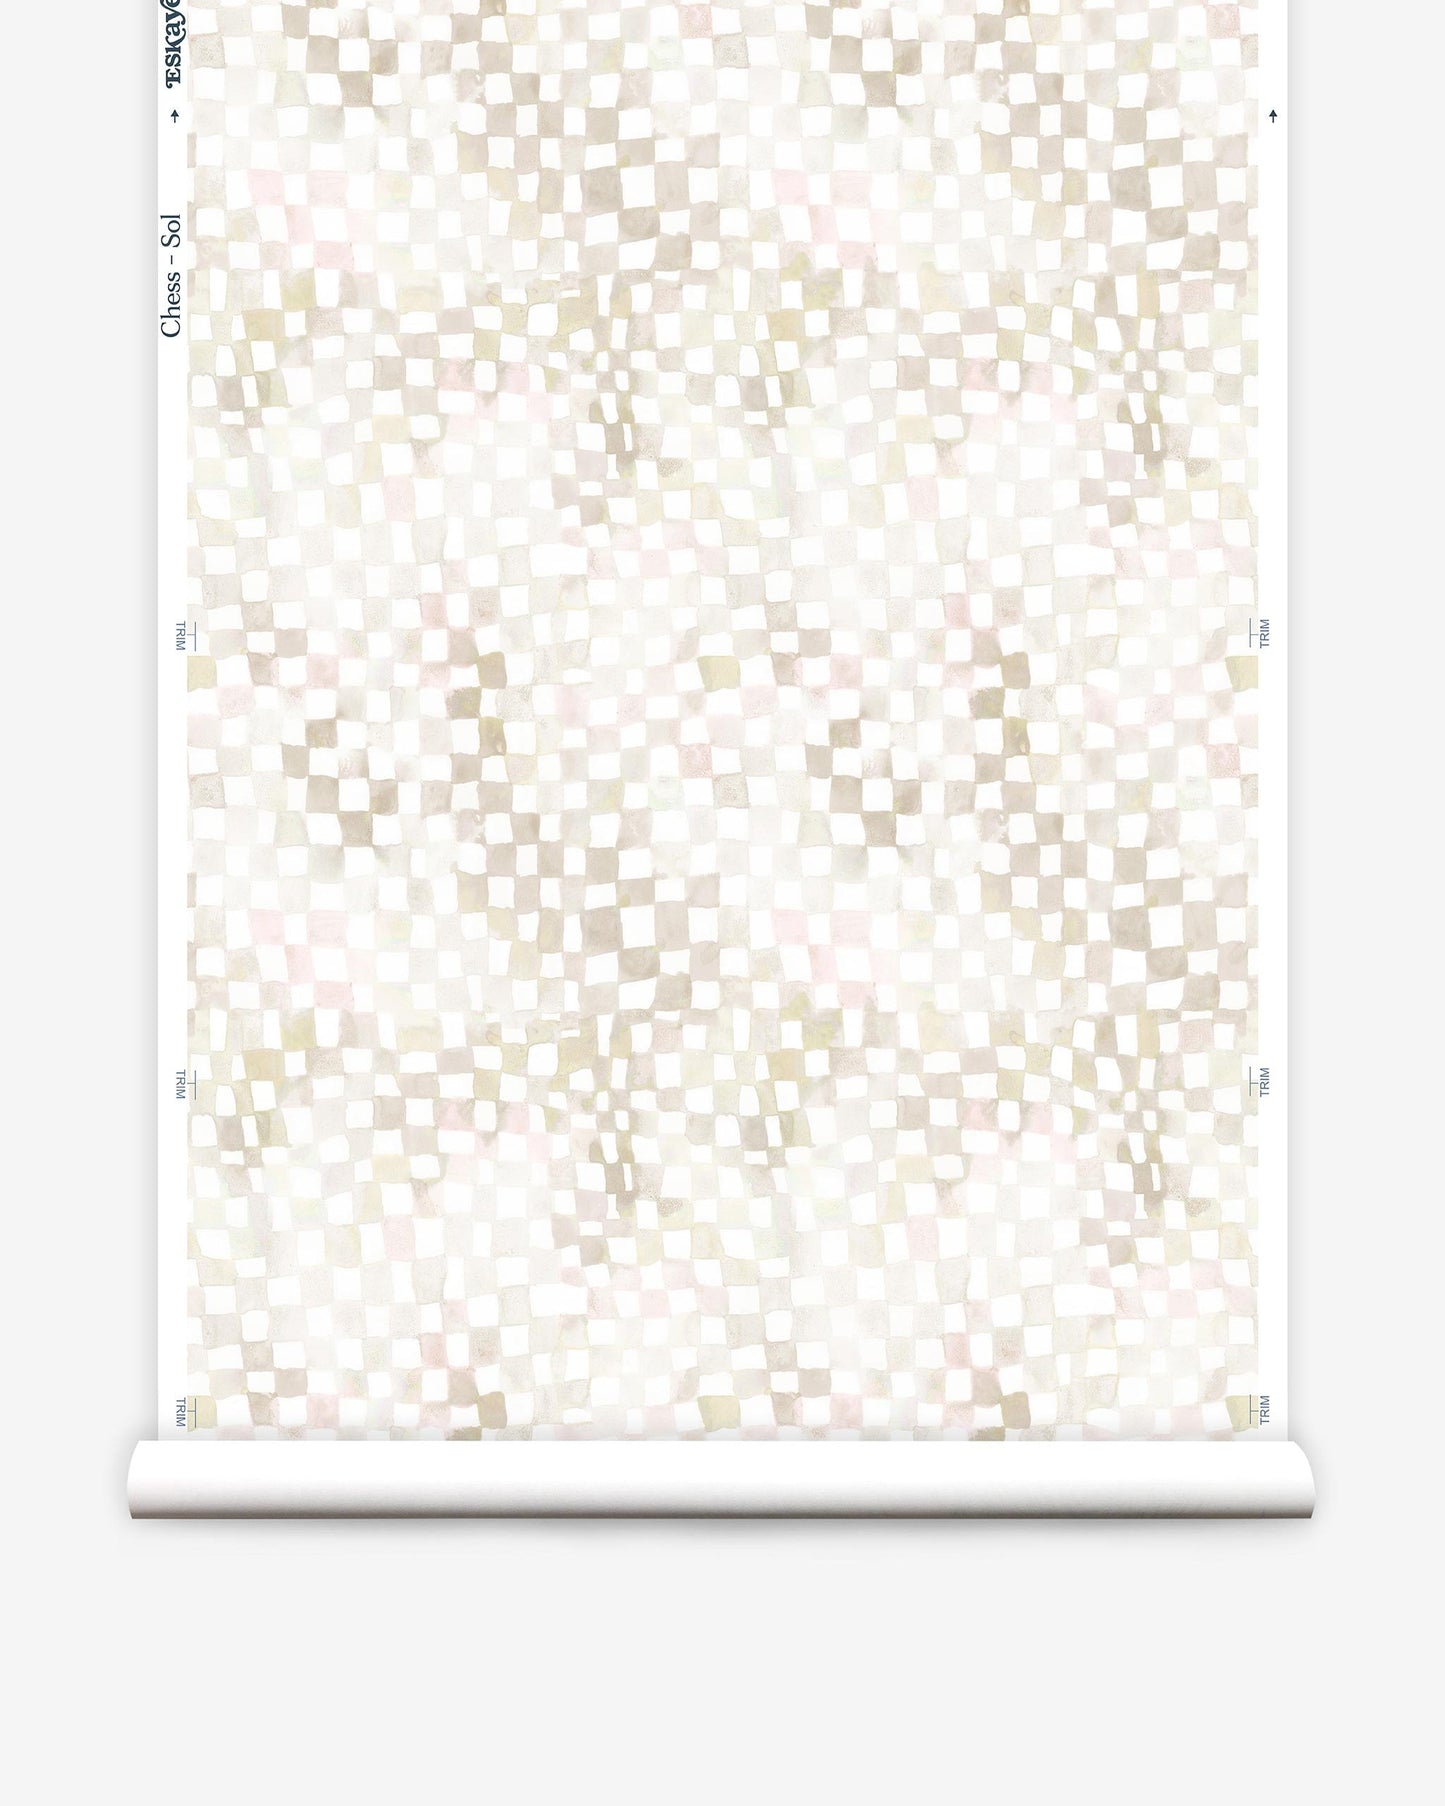 A roll of Chess Wallpaper||Sol with a pink and white checkered pattern.